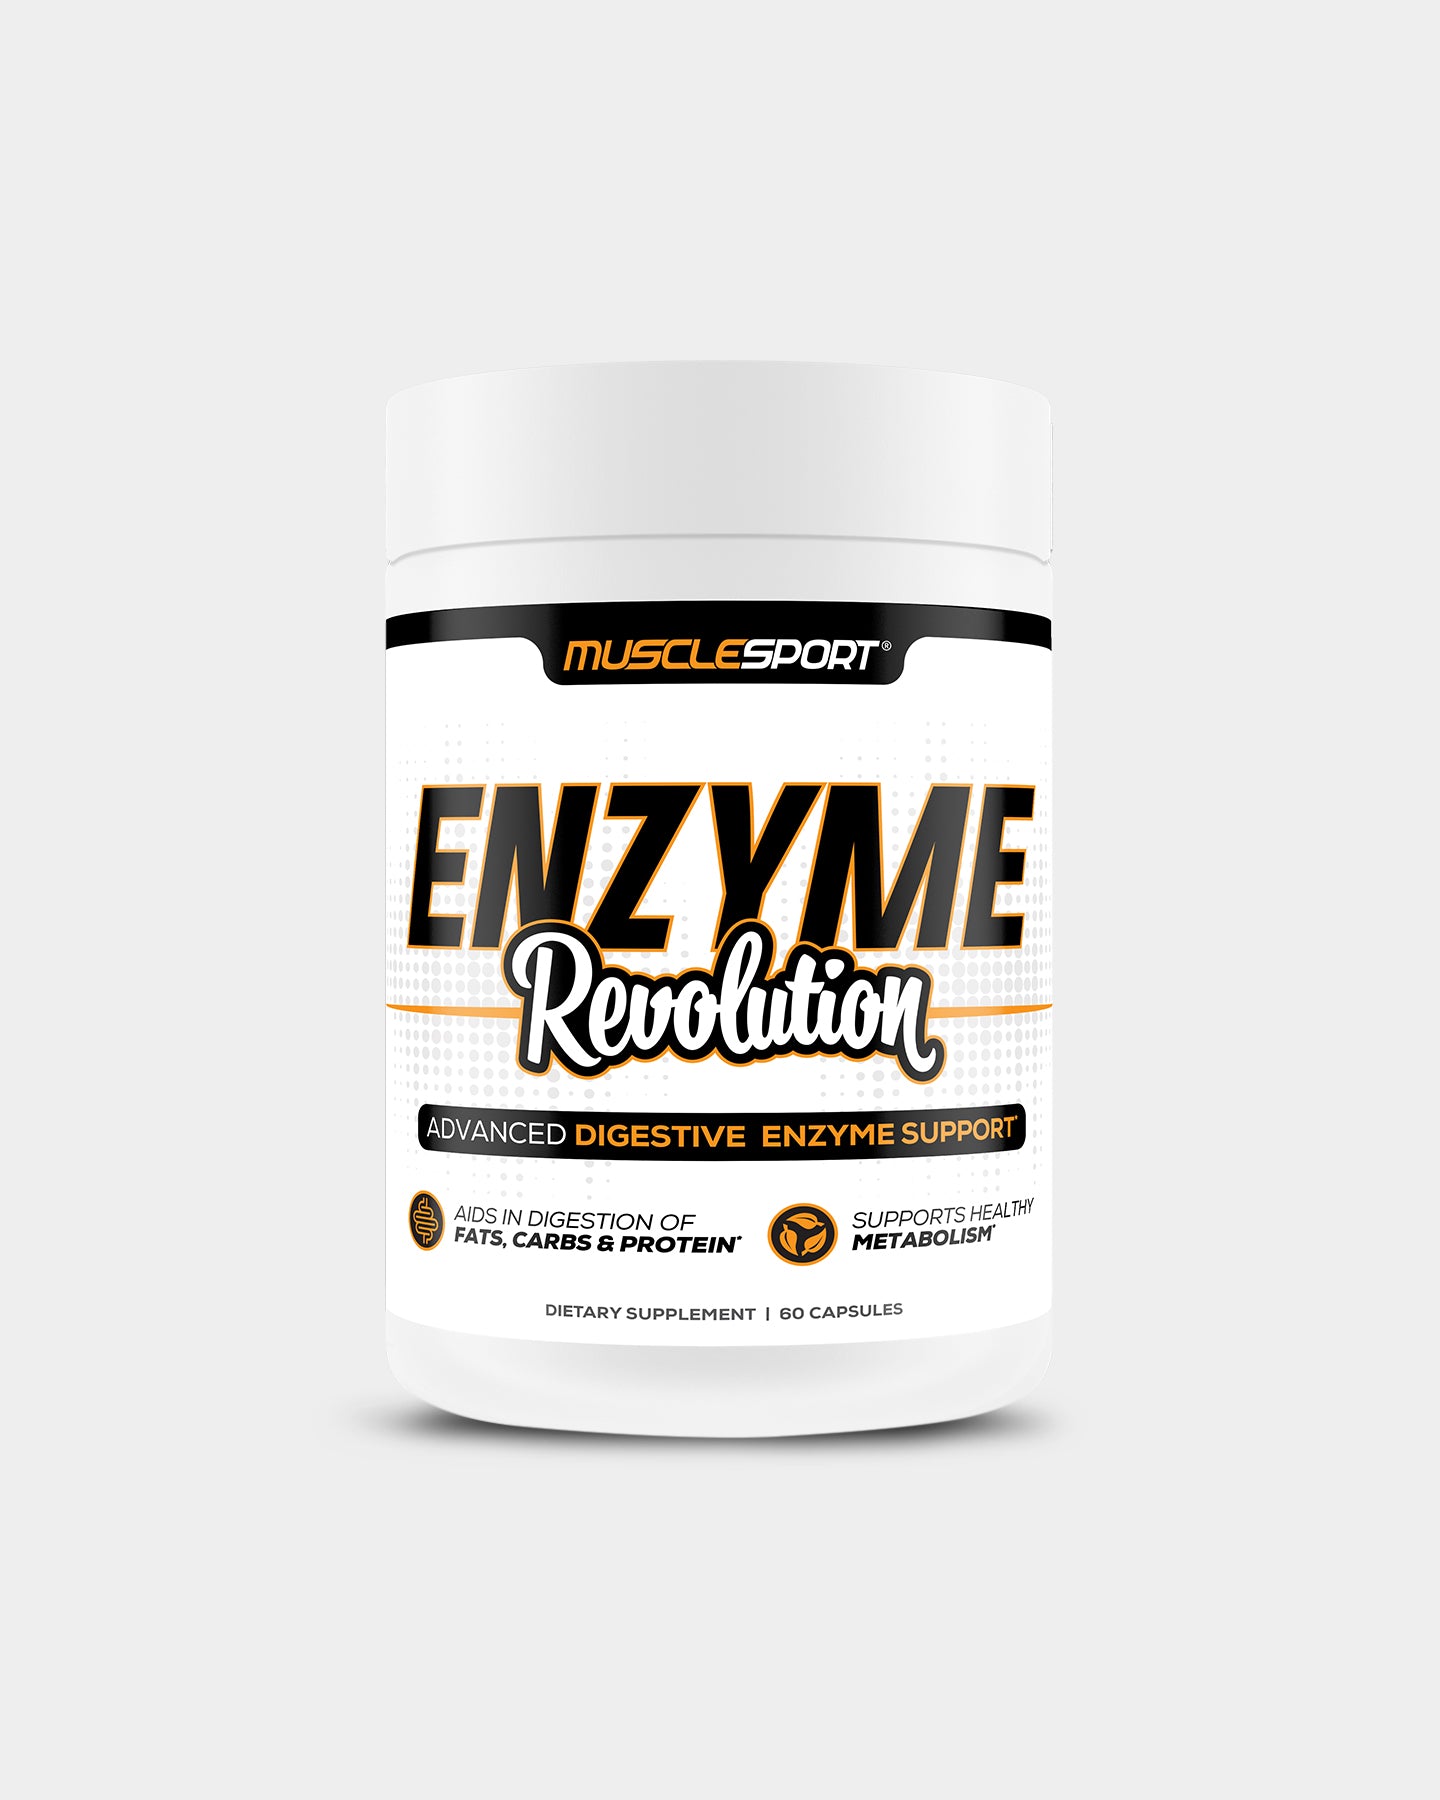 Musclesport Enzyme Revolution  A1